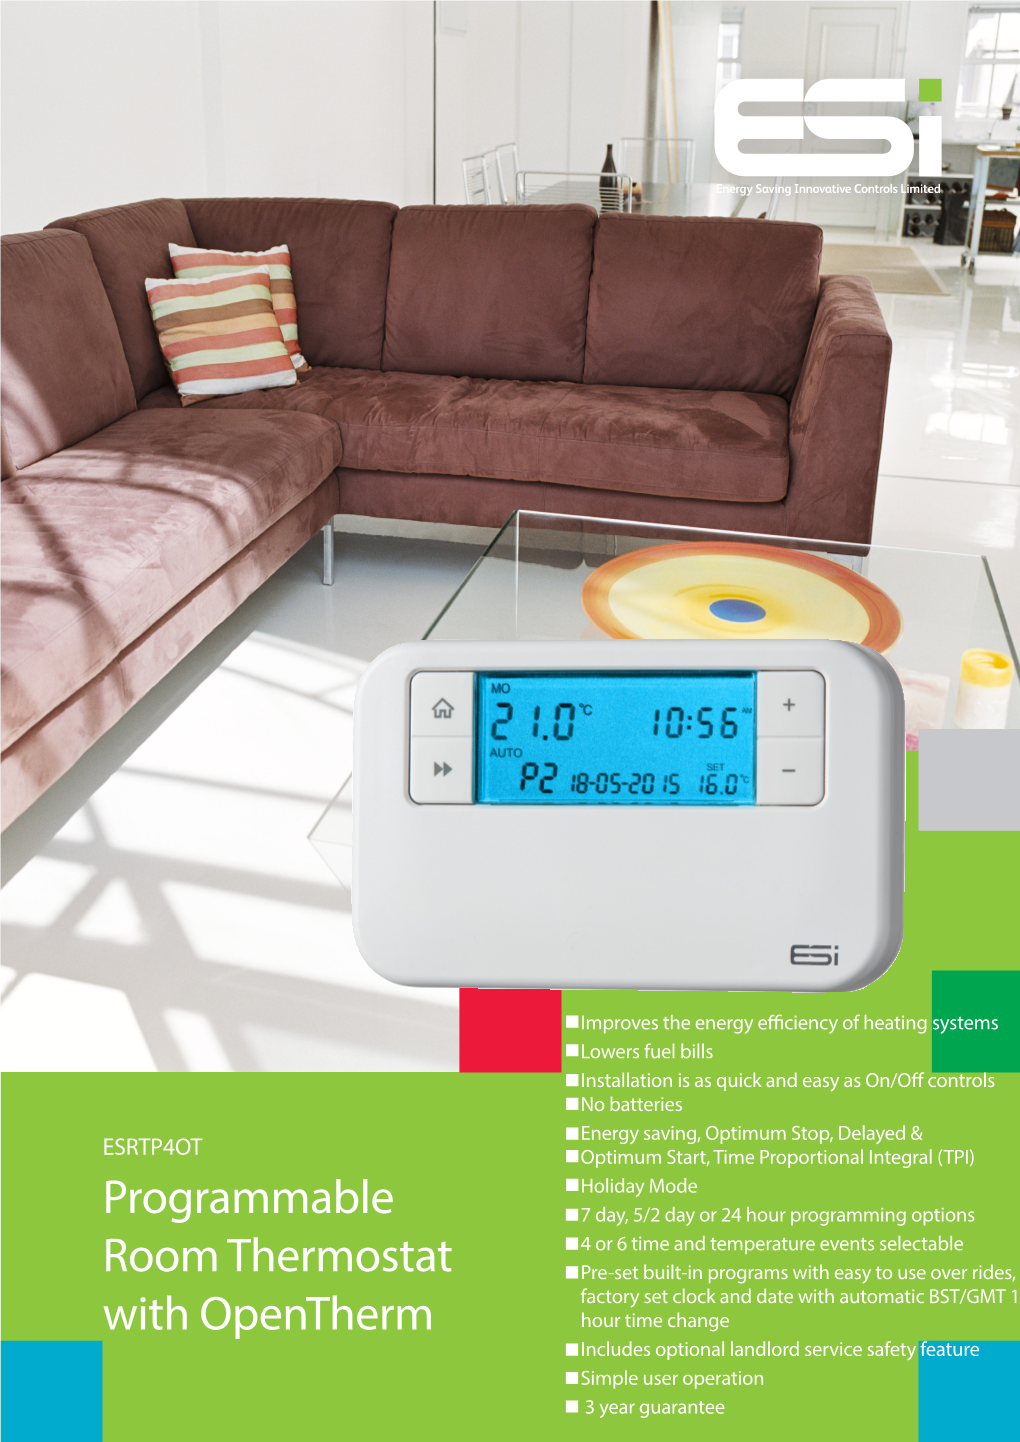 Programmable Room Thermostat with Opentherm